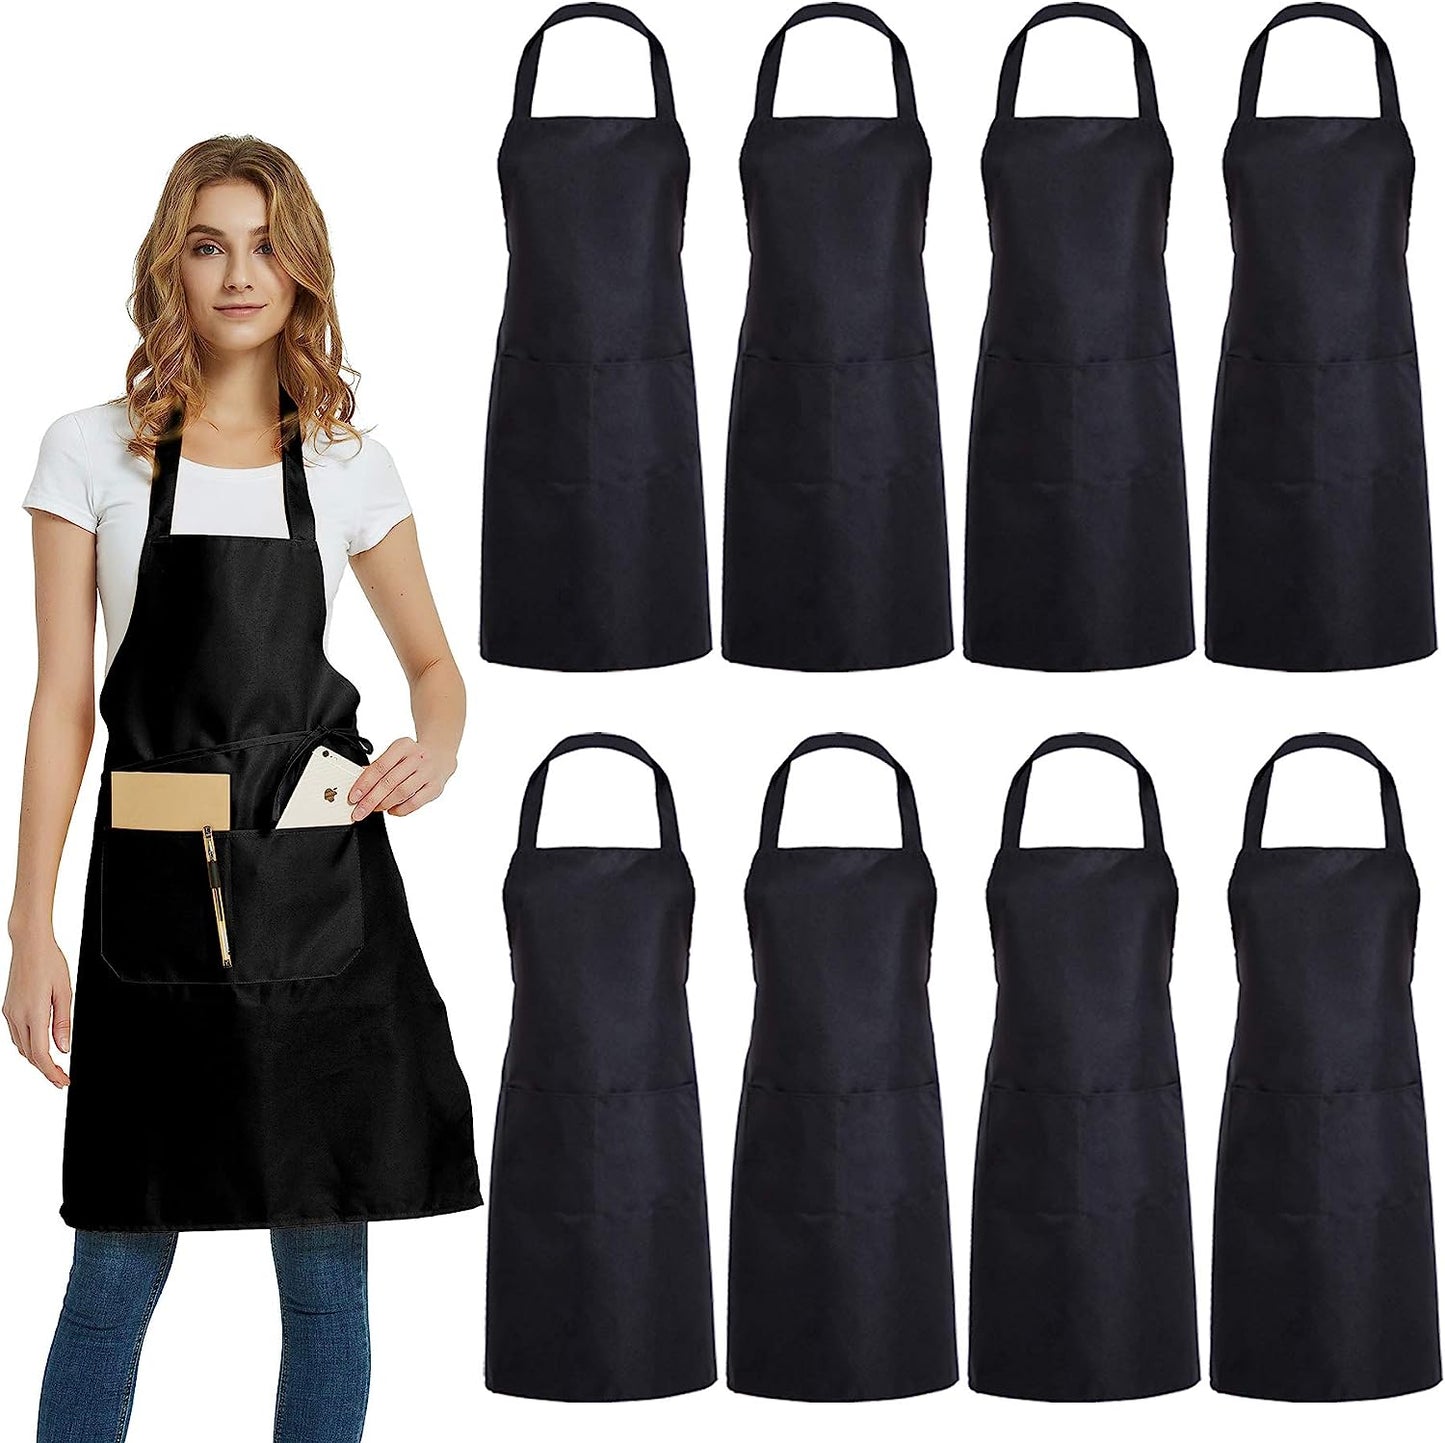 Custom Promotional Aprons With 2 Front Full Body Pockets Aprons for Men and Women